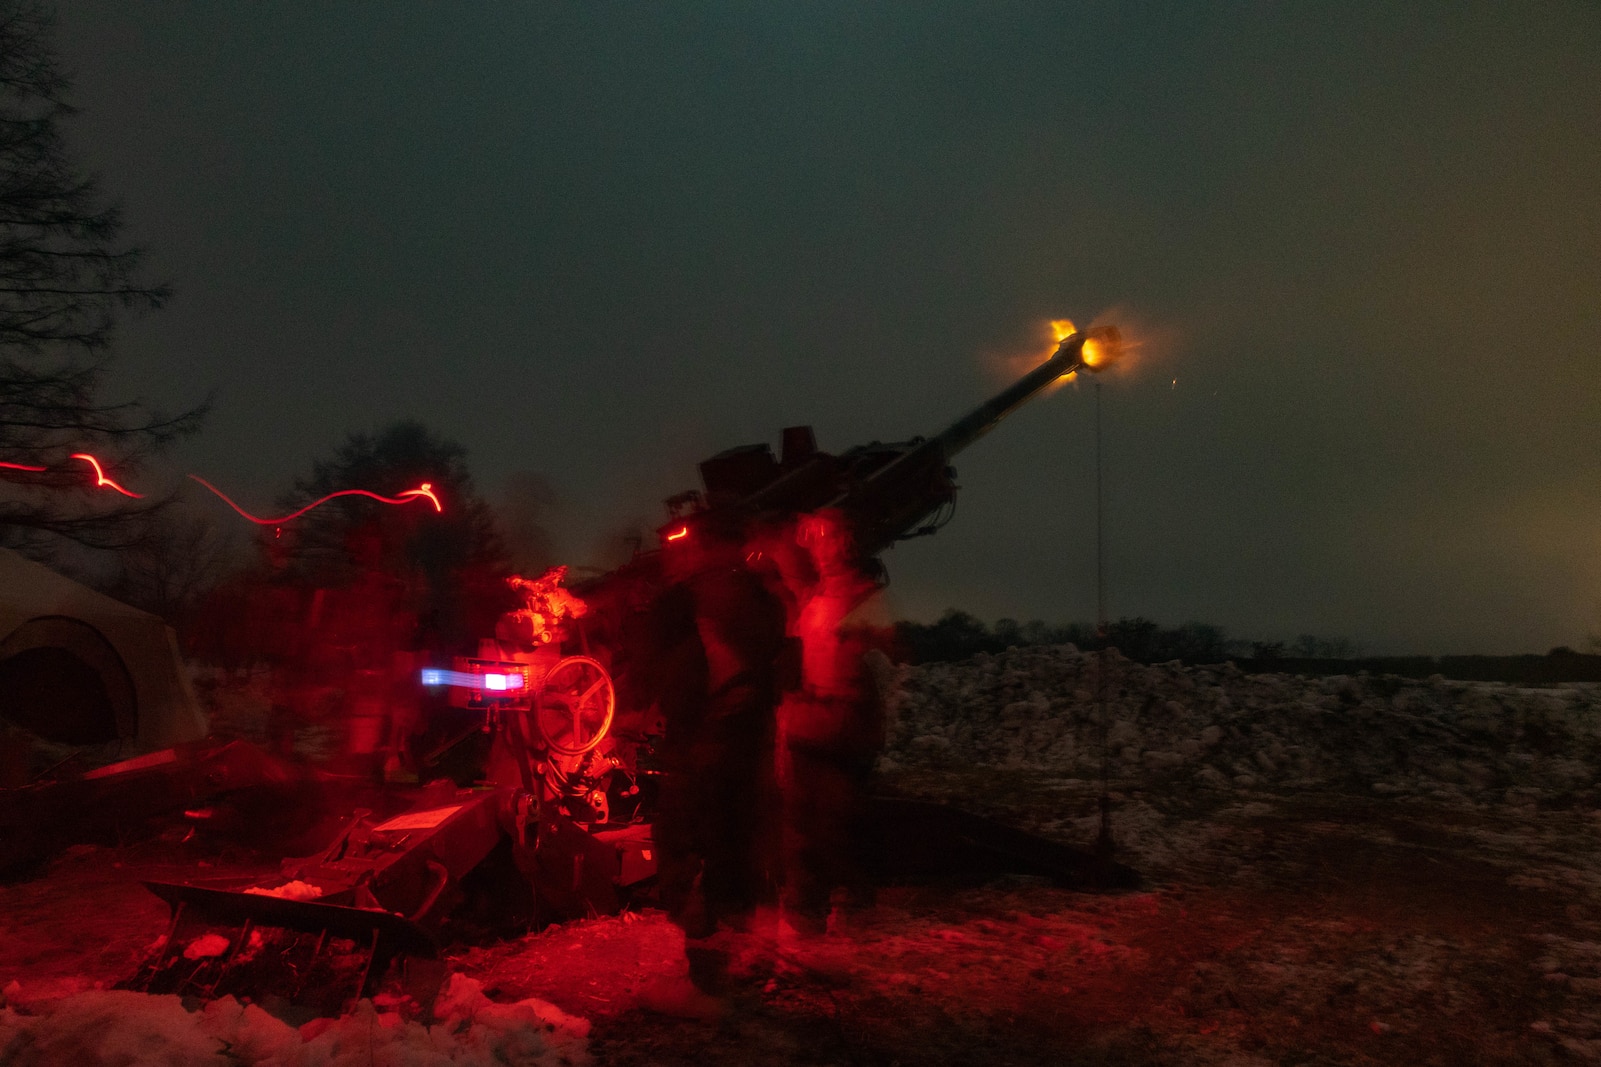 U.S. Marines with 3d Battalion, 12th Marines fire an M777 towed 155 mm howitzer while conducting night live-fire training during Artillery Relocation Training Program 22.4 at the Yausubetsu Maneuver Area, Hokkaido, Japan, Jan. 30, 2023. The skills developed at ARTP increase the proficiency and readiness of the only permanently forward-deployed artillery unit in the Marine Corps, enabling them to provide precision indirect fires. (U.S. Marine Corps photo by Lance Cpl. Jaylen Davis.)